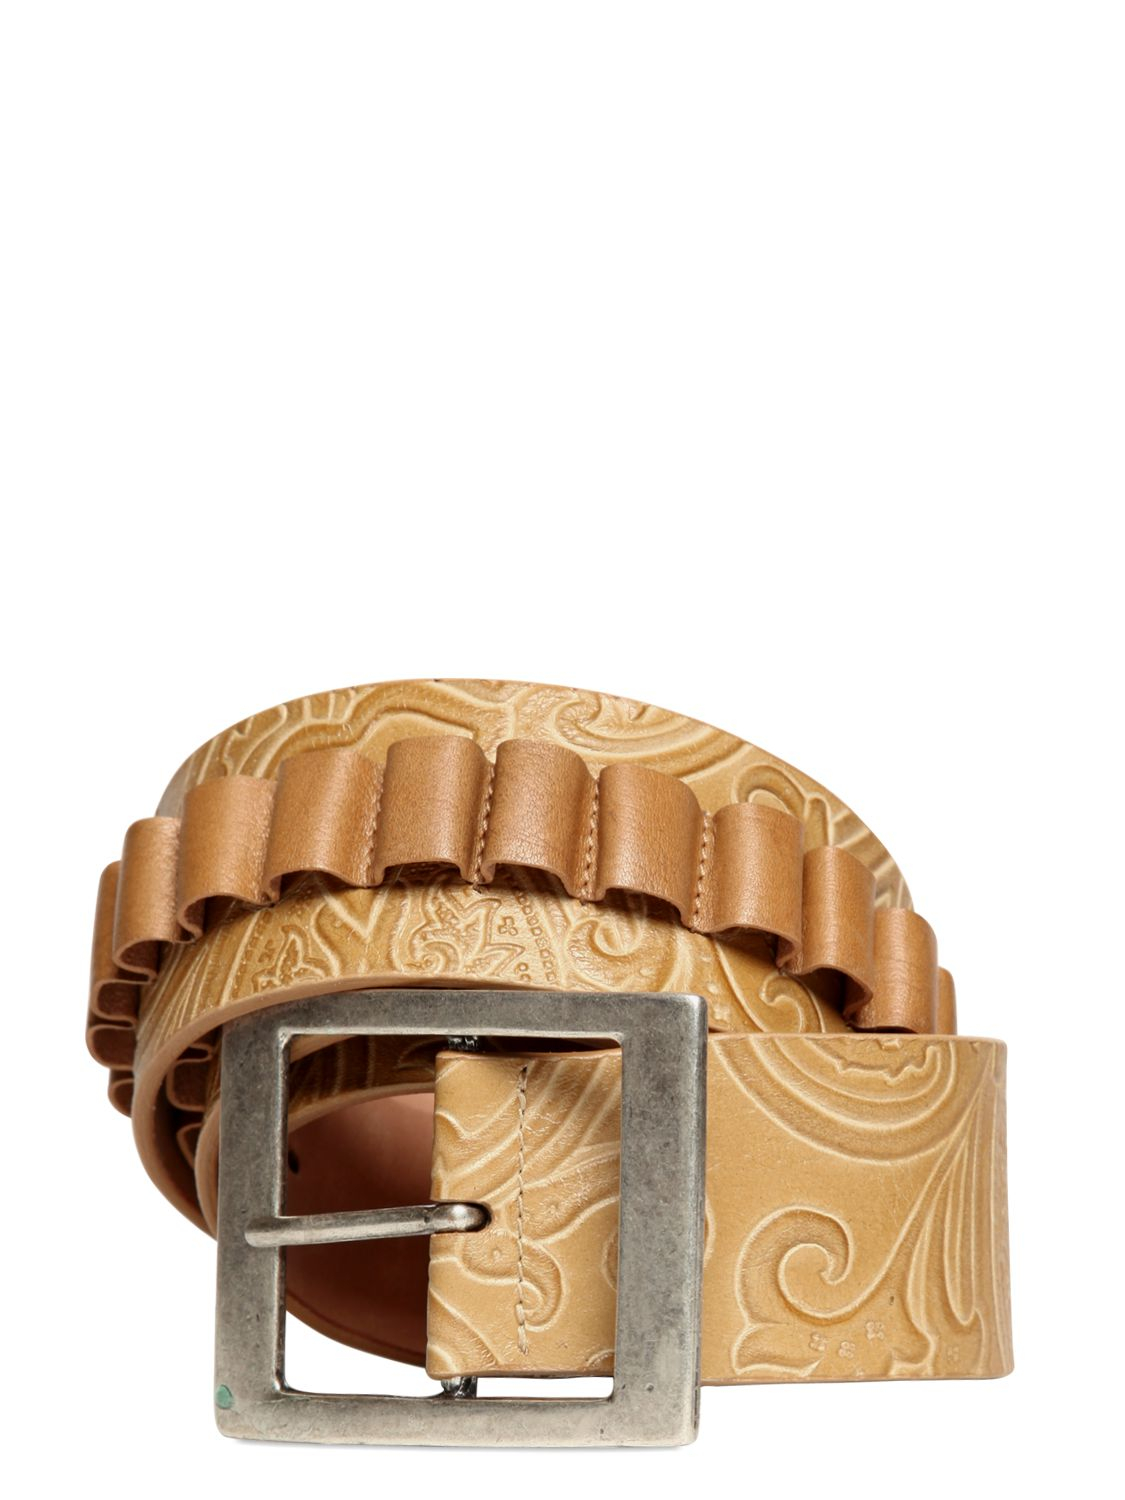 Etro Lasered Paisley Bullet Leather Belt in Sand (Natural) for Men - Lyst